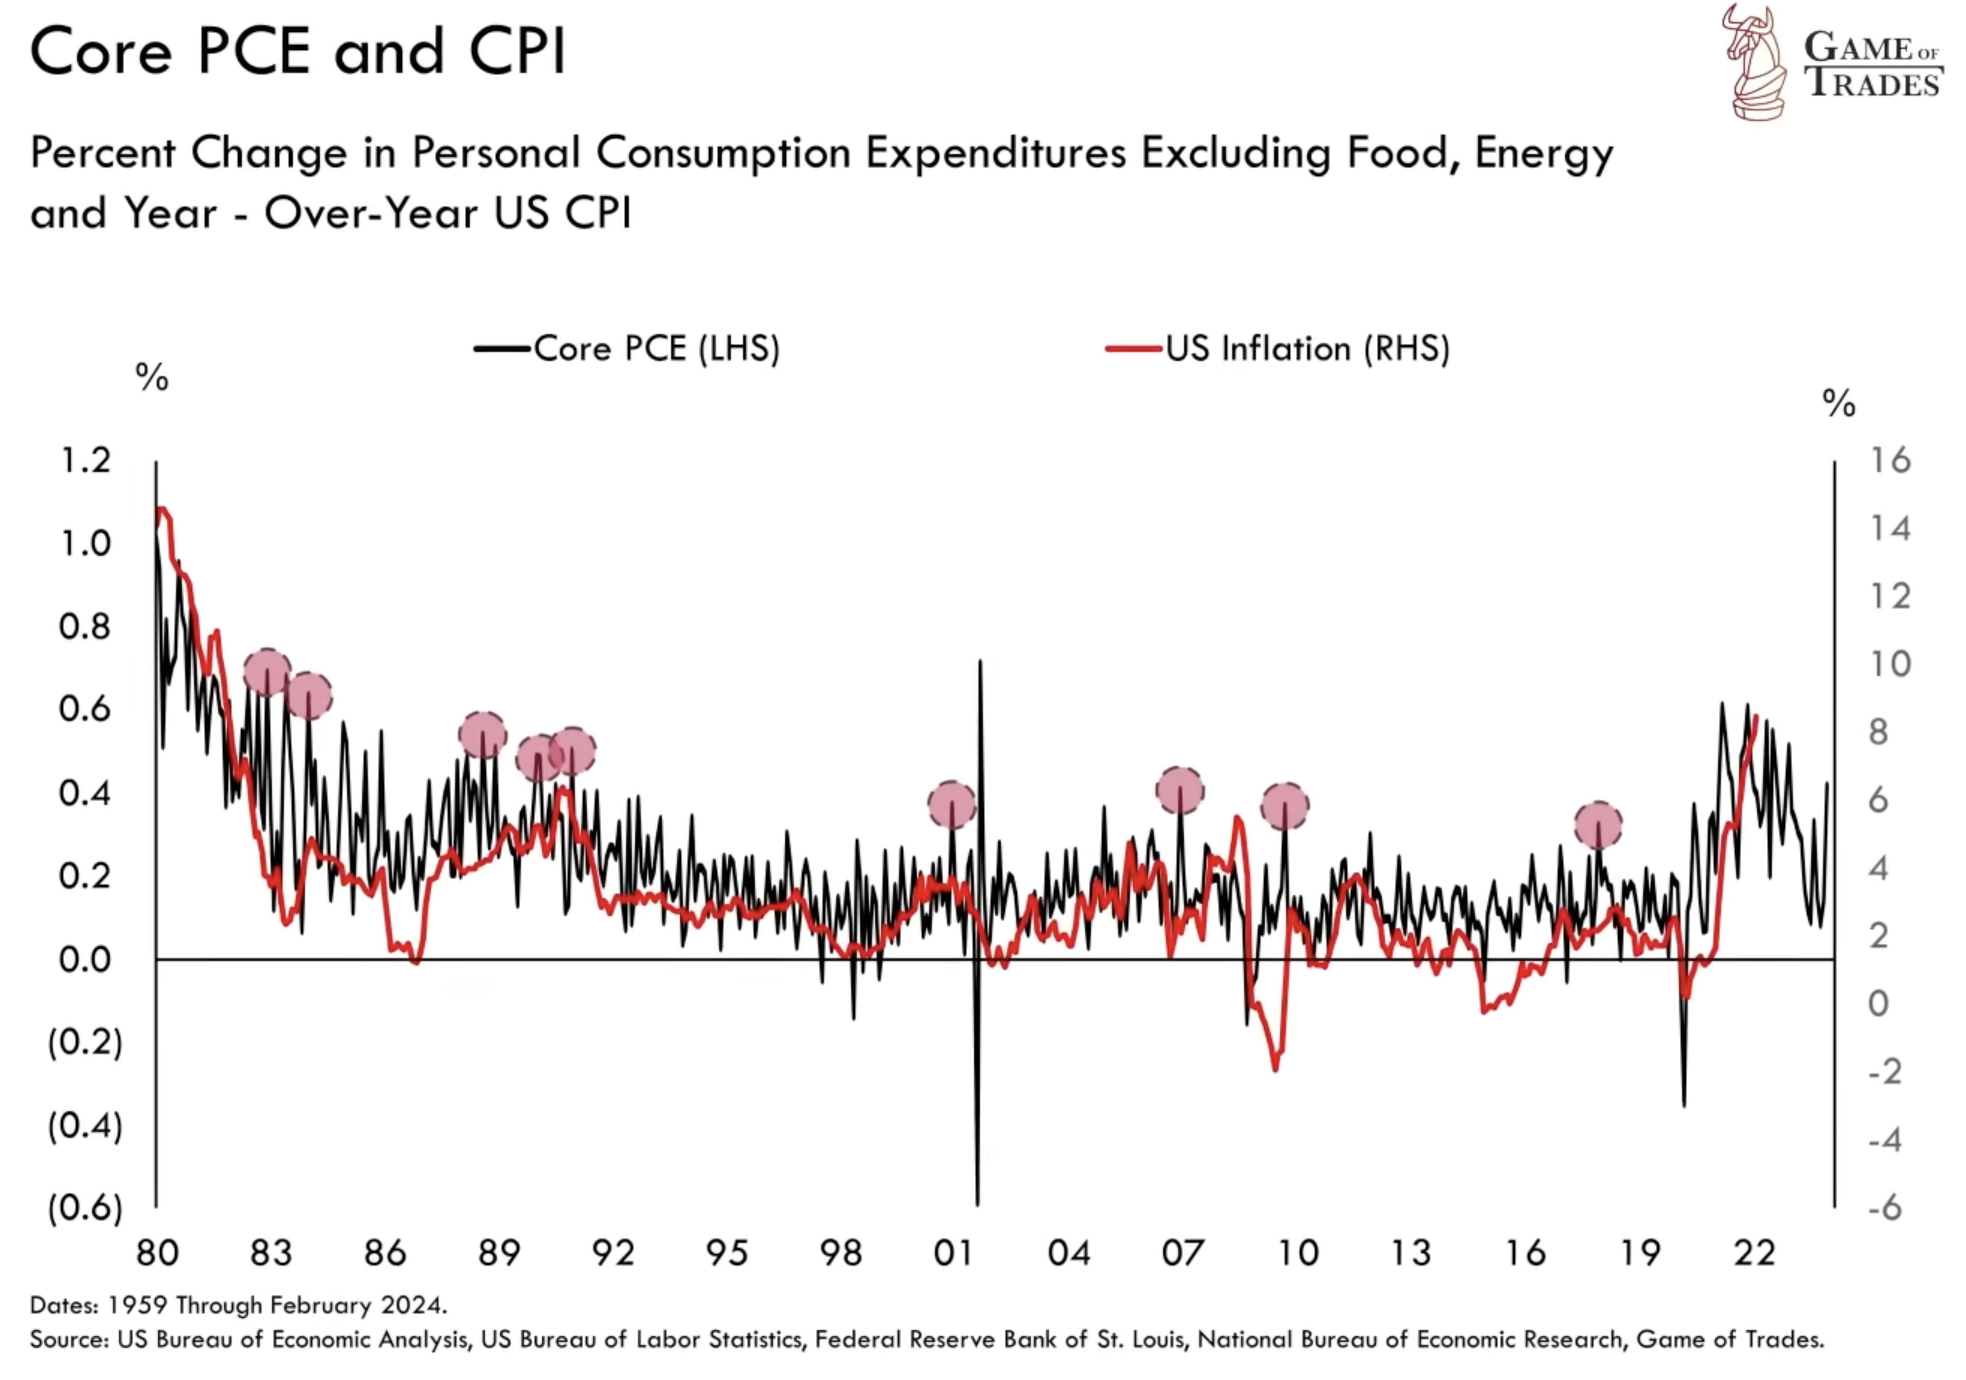 Percent Change in Personal Consumption Expenditures 